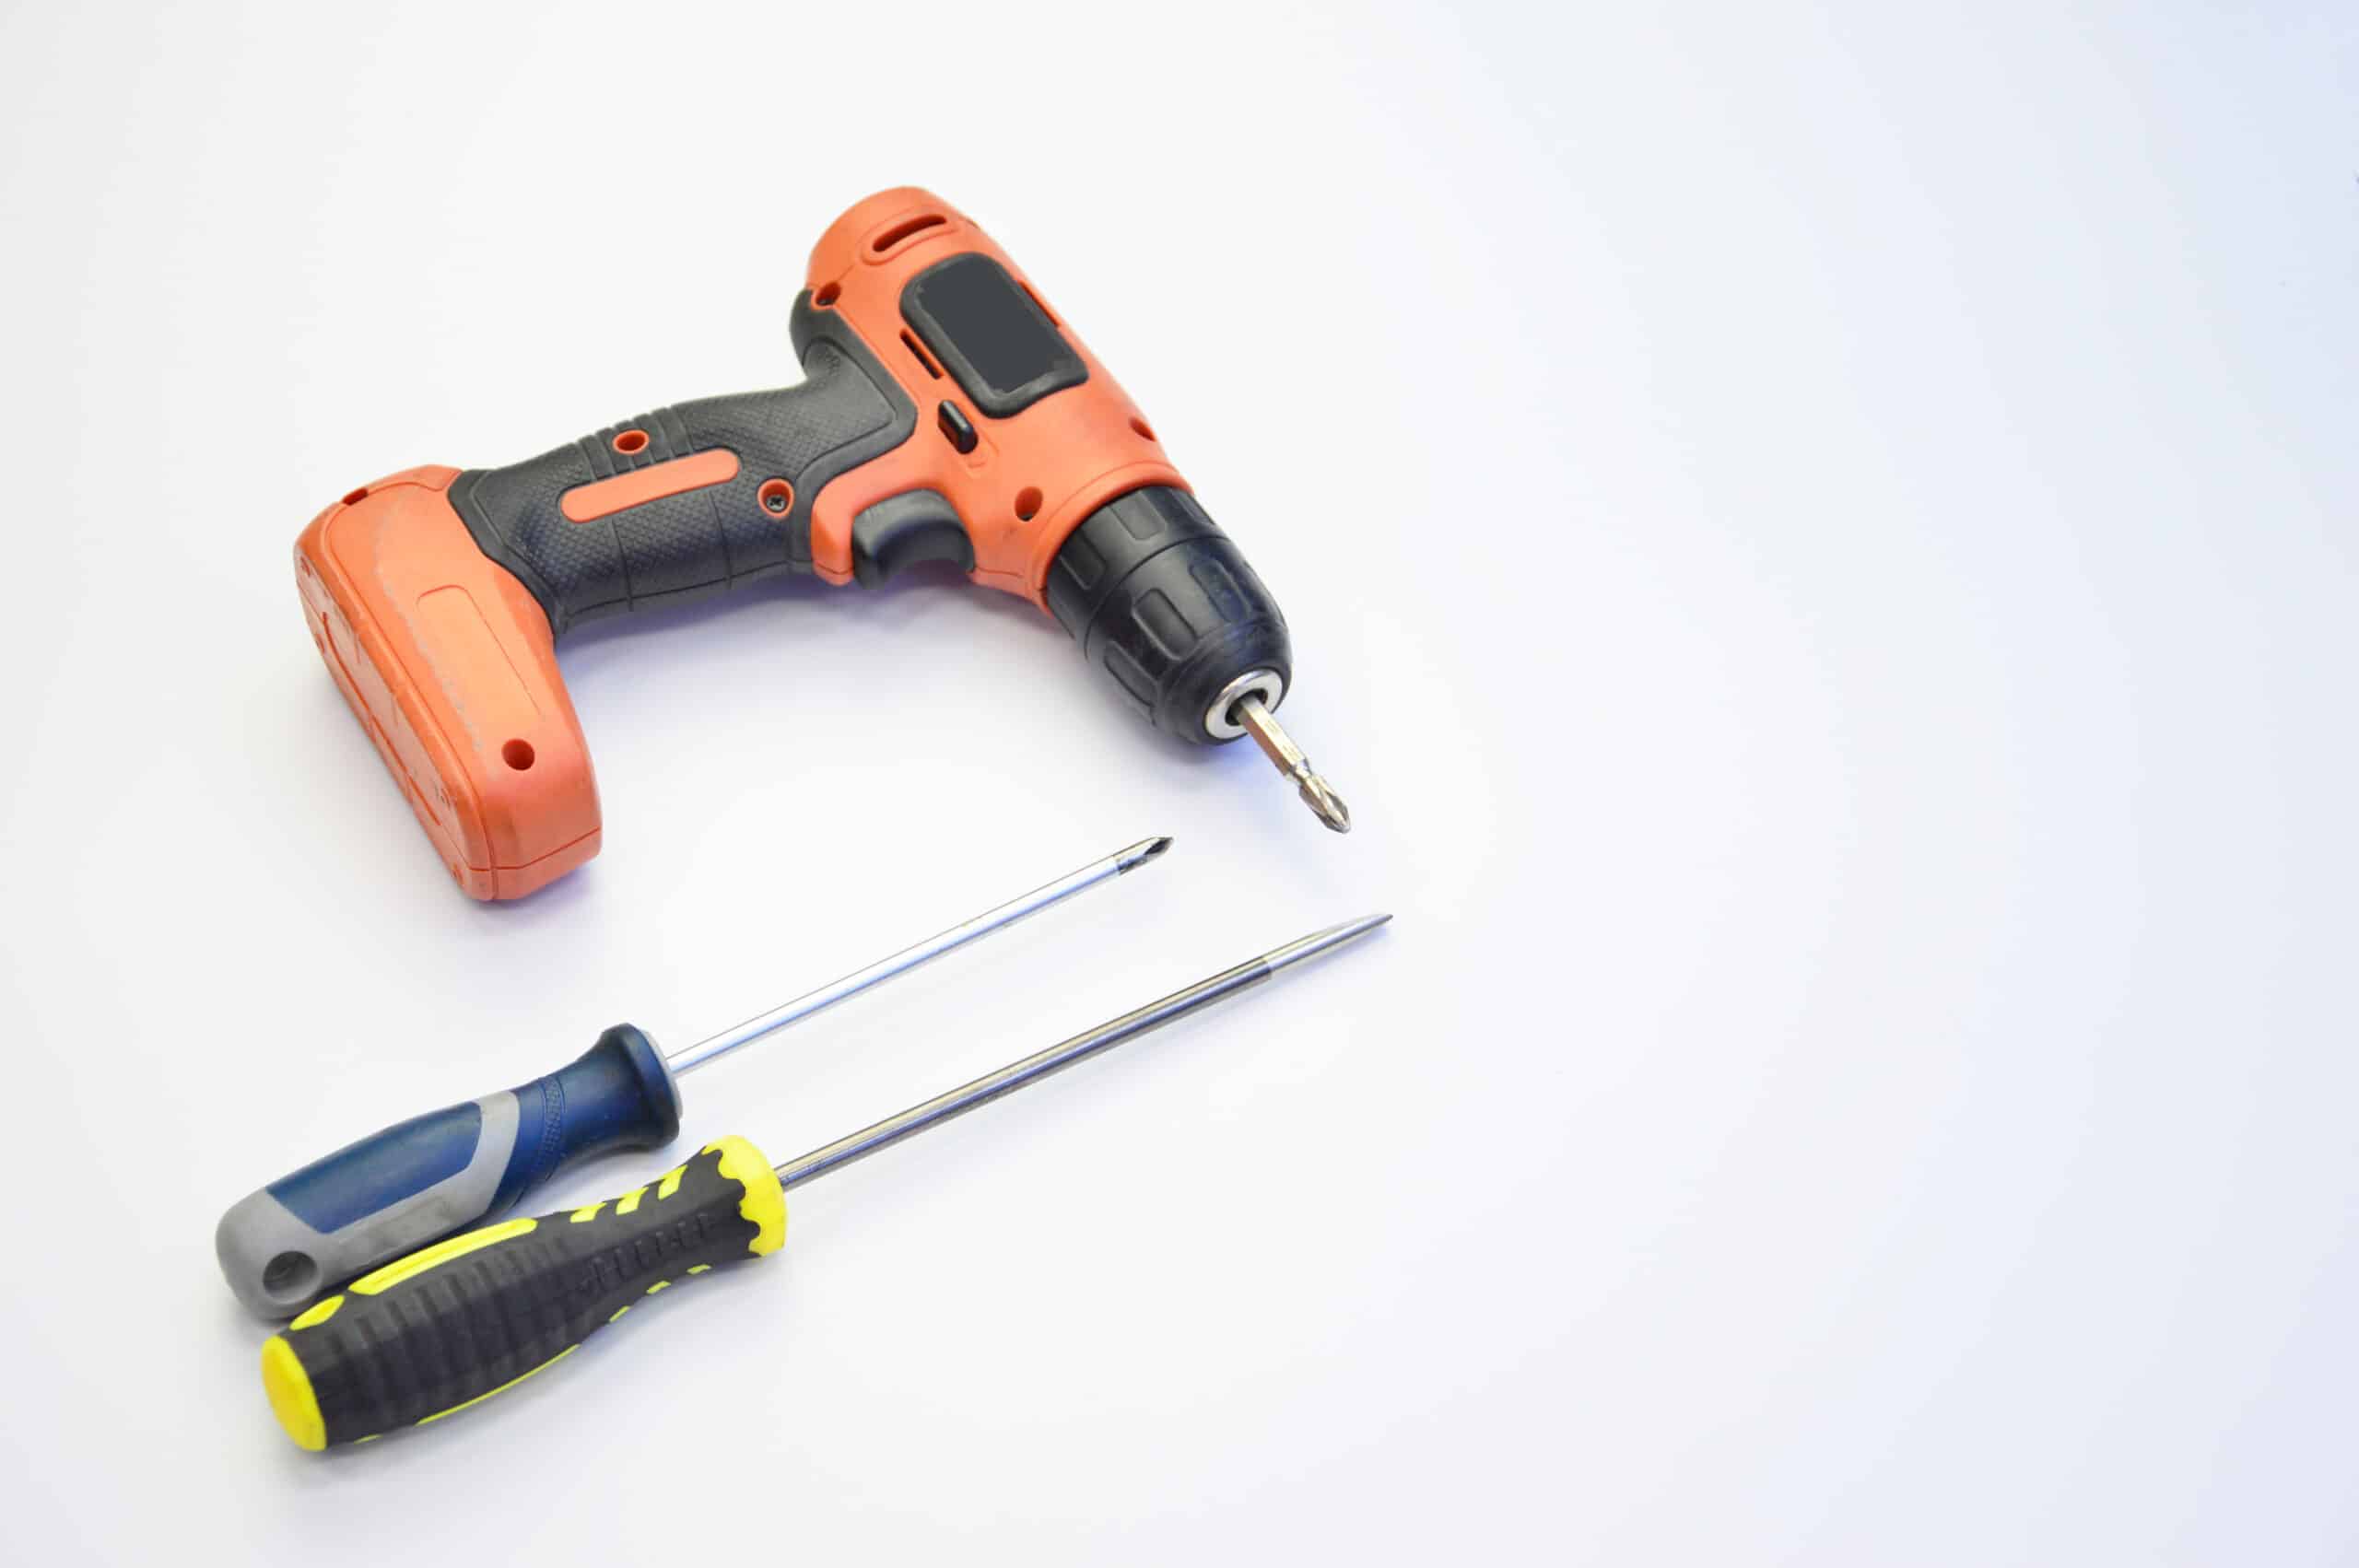 theprecisiontools.com : What is the difference between a power drill and a cordless screwdriver?